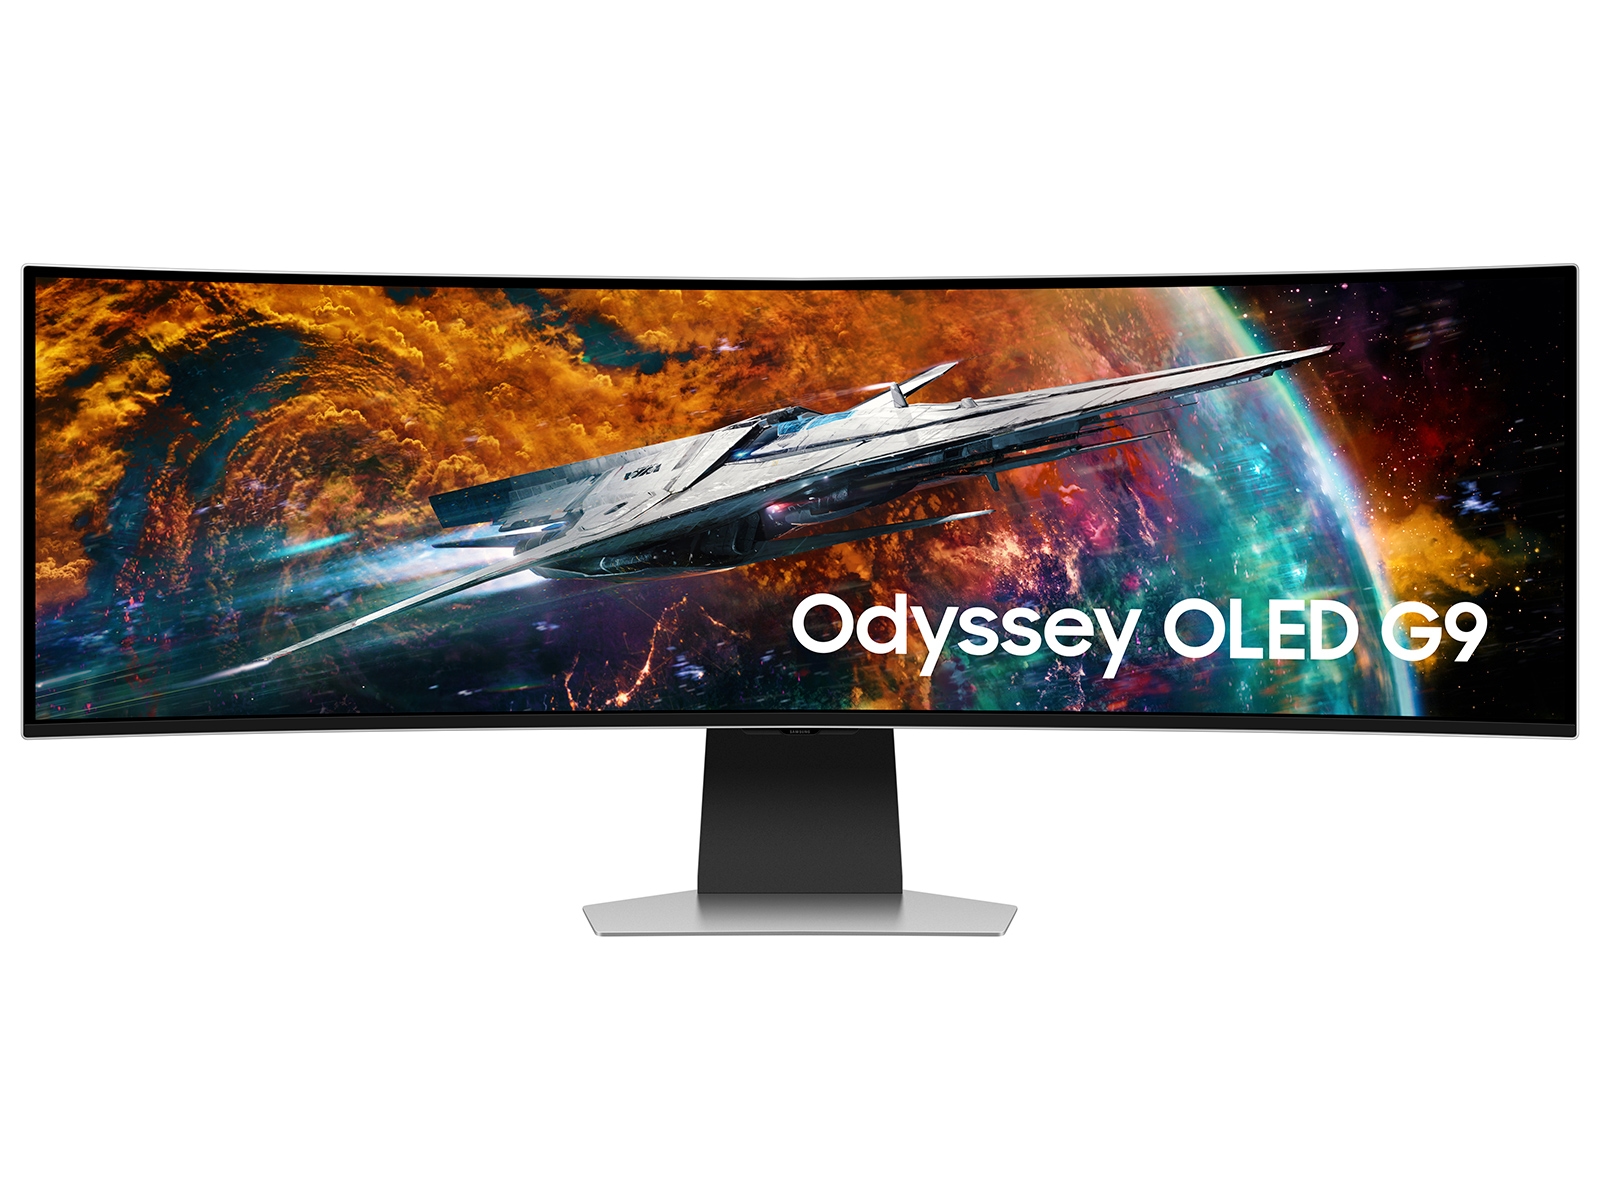 Odyssey OLED G9 Curved Smart Monitor | Samsung US